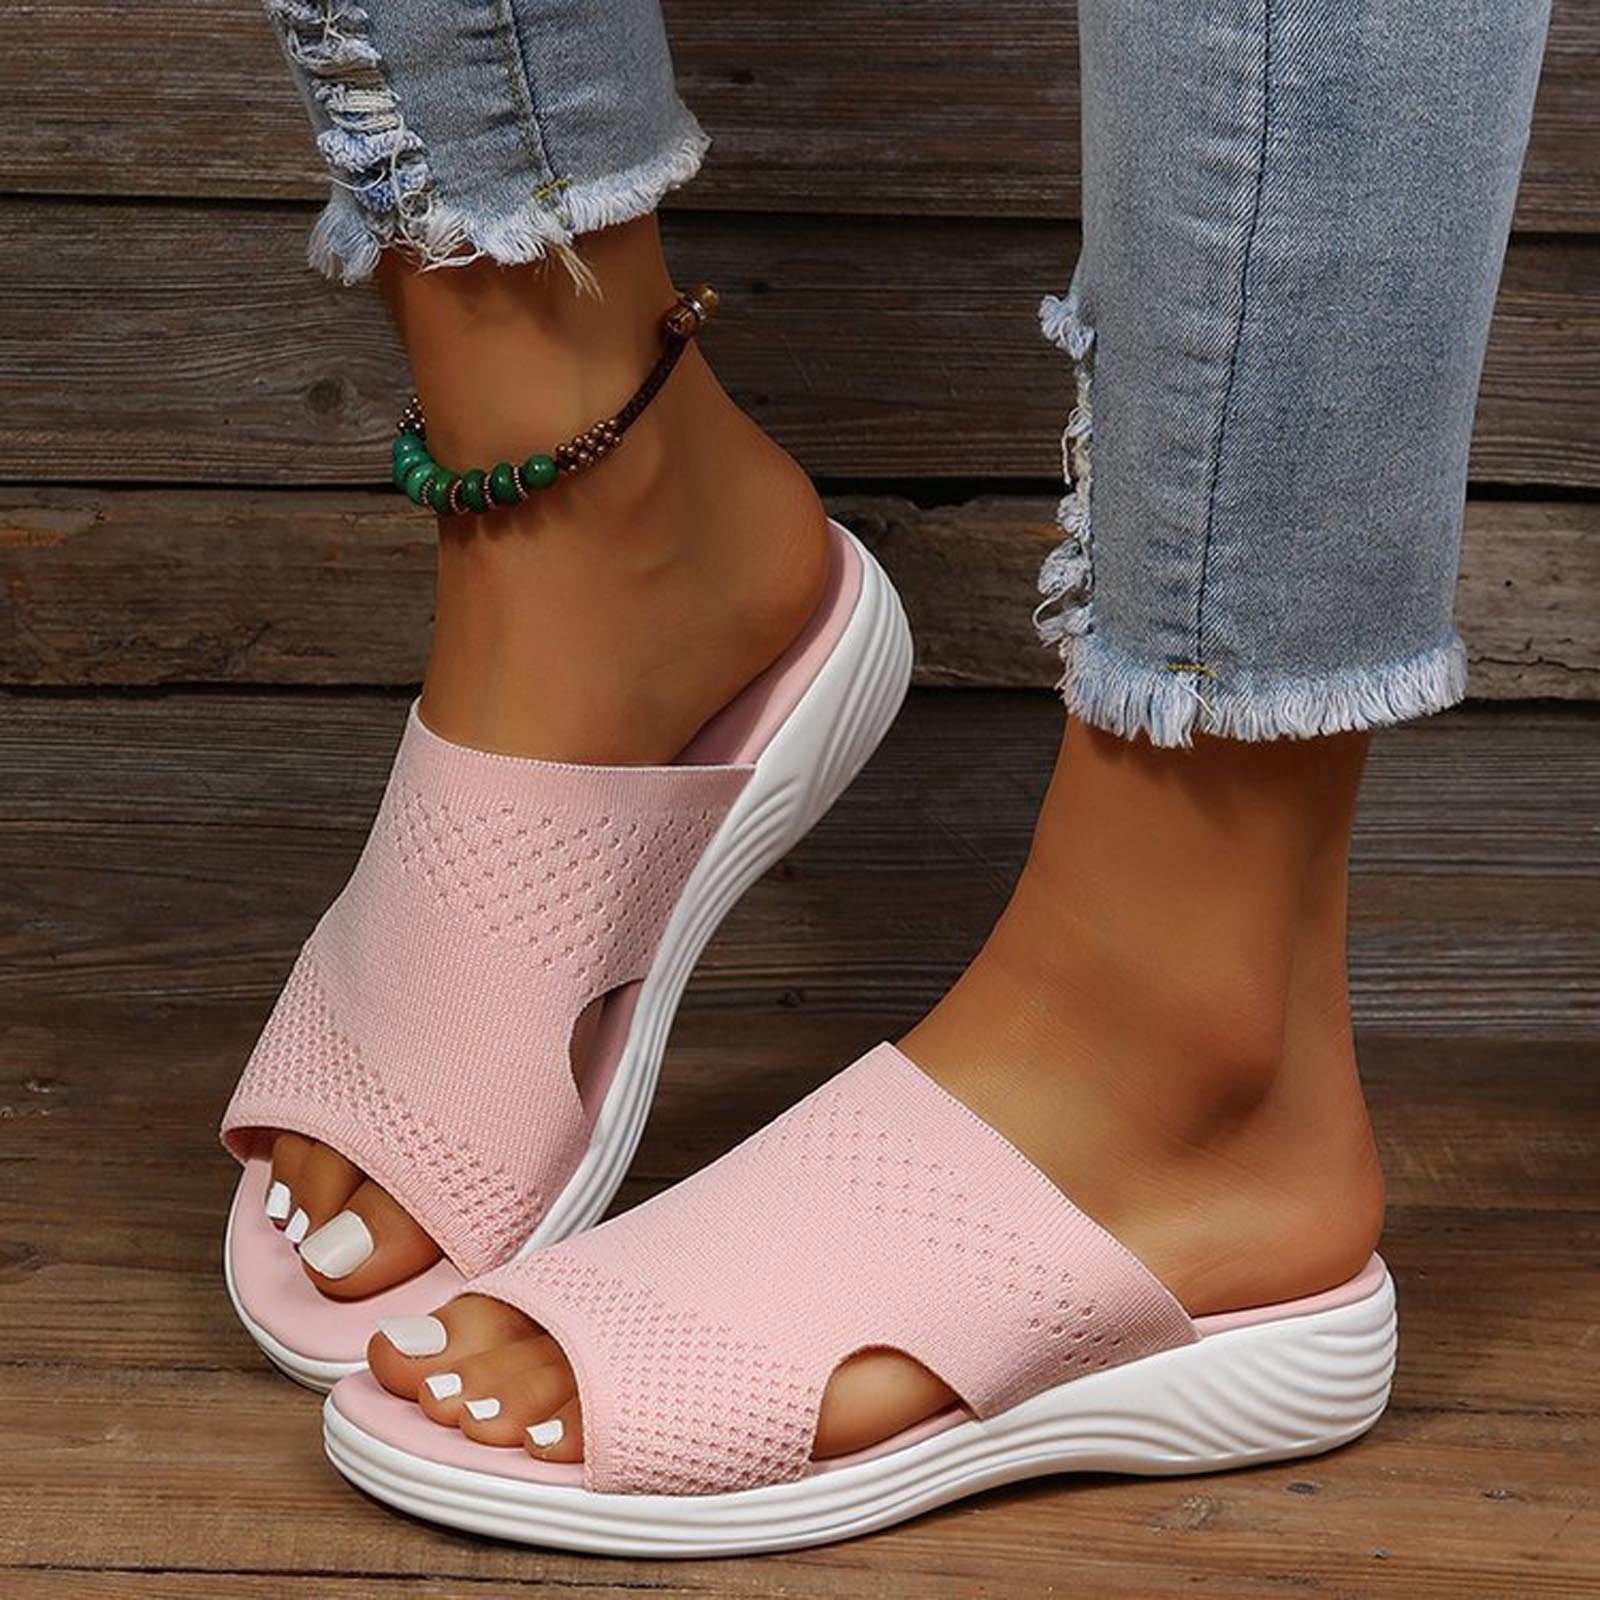 Aueoeo Womens Wedge Shoes, Wedge Sandals for Women Ankle Strap Low Wedge  Sandals Open Toe Dress Platform Shoes Dressy Summer Sandals